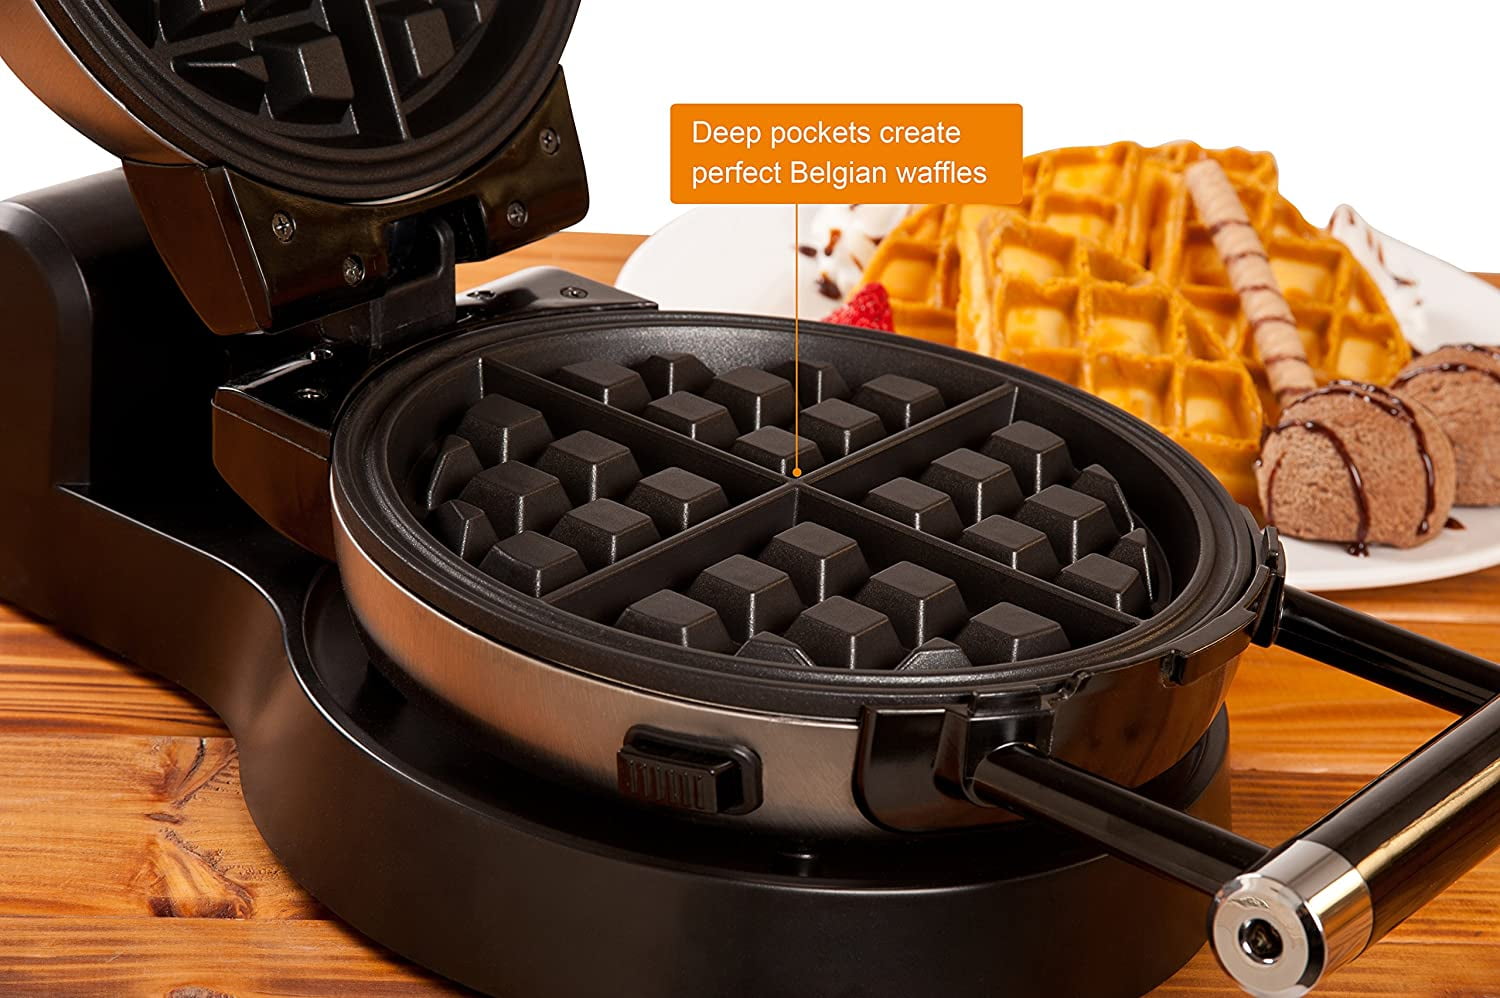 Best Waffle Maker With Removable Plates For Kitchen Equipment - GoodLoog